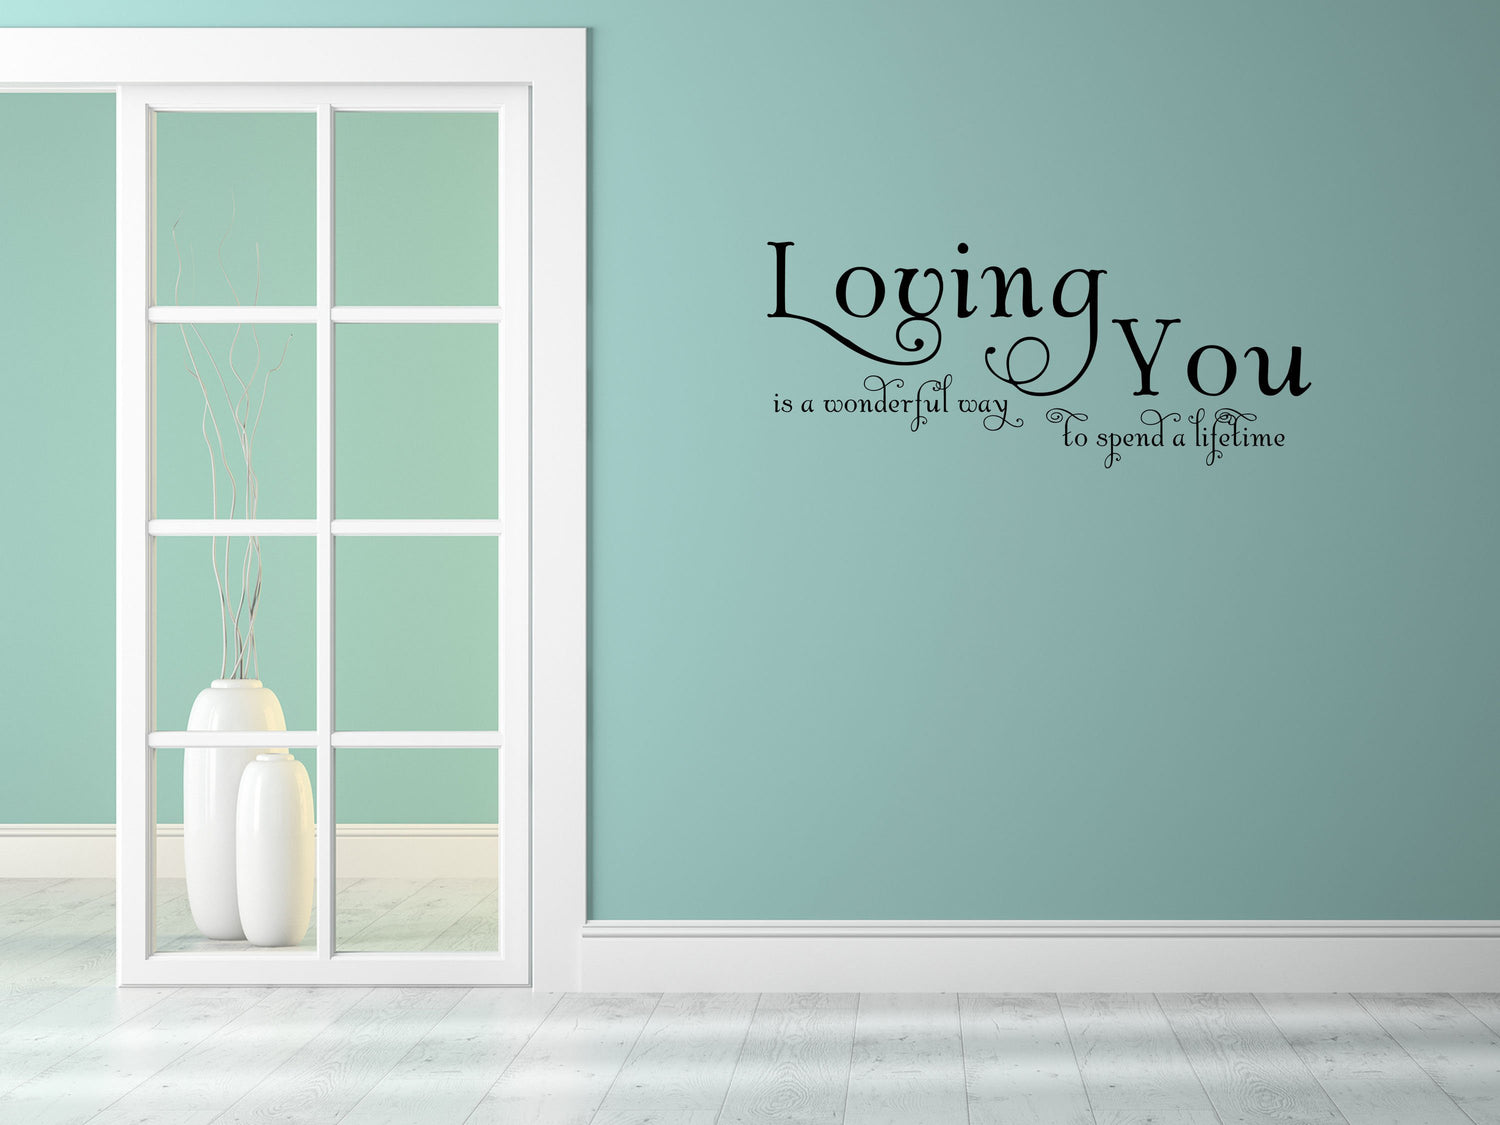 Loving You Is A Wonderful Way To Spend A Lifetime - Inspirational Wall Decals Vinyl Wall Decal Inspirational Wall Signs 